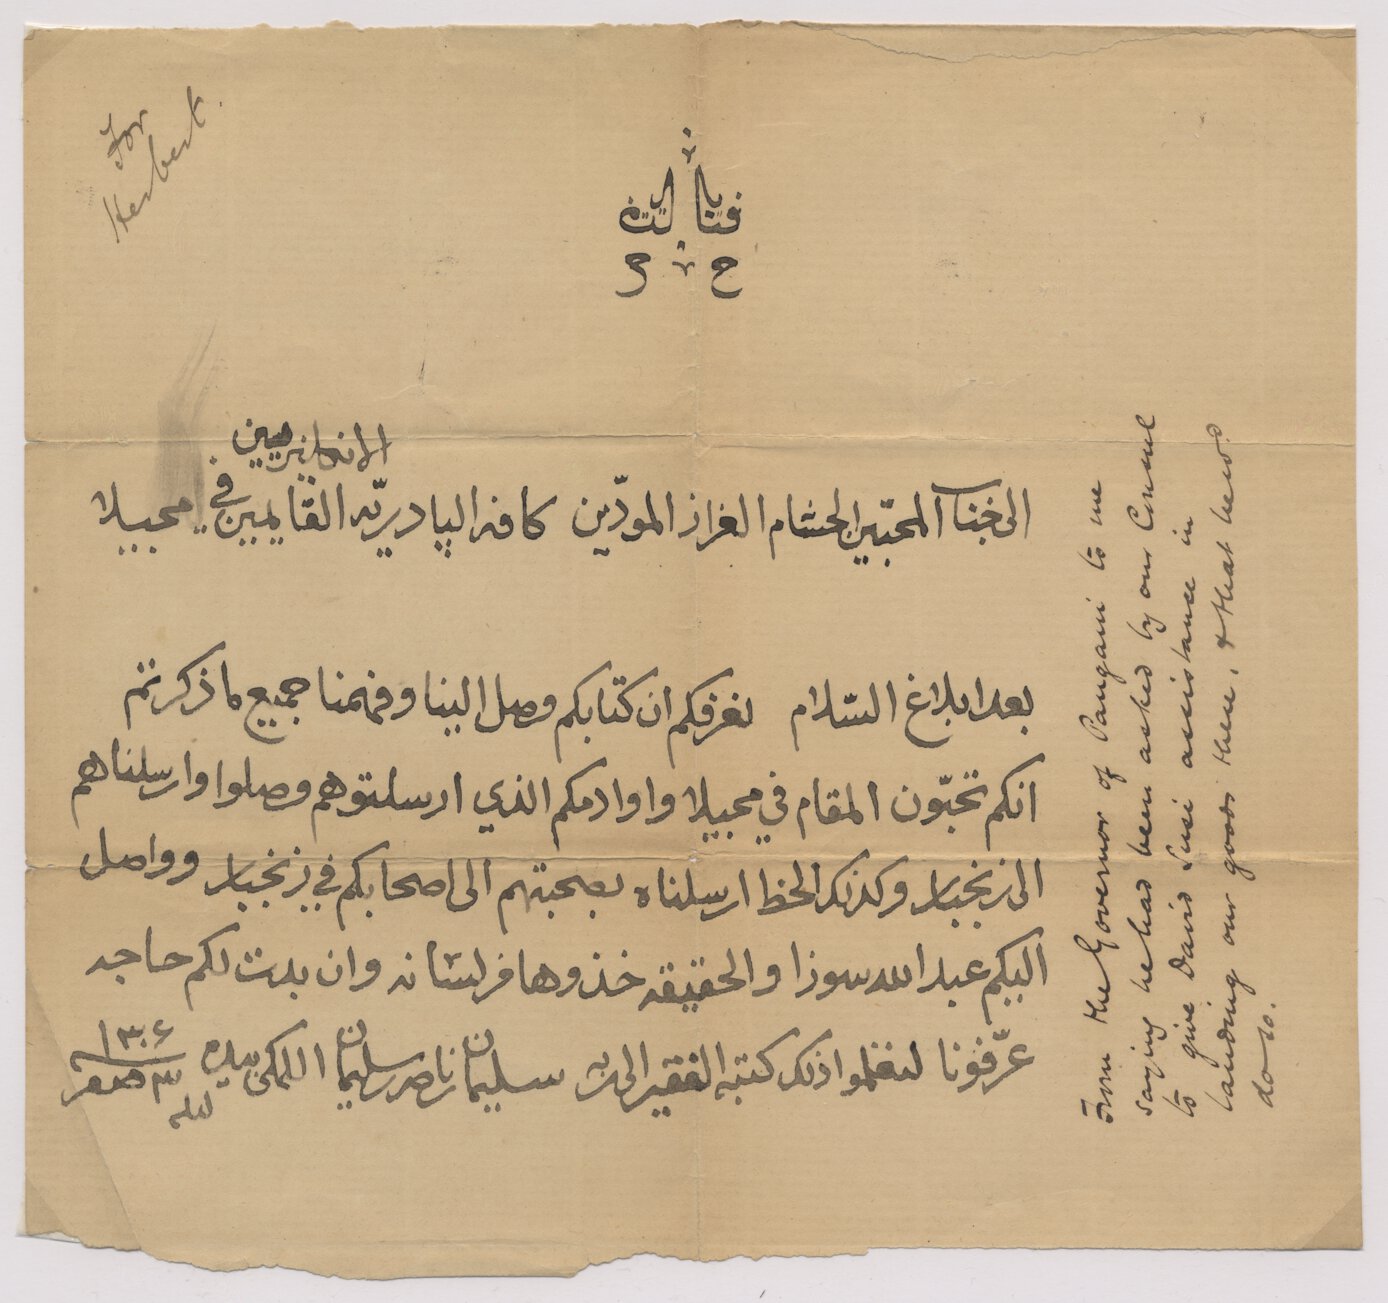 Manuscript in Arabic with English language description below and “For Herbert” written at right.